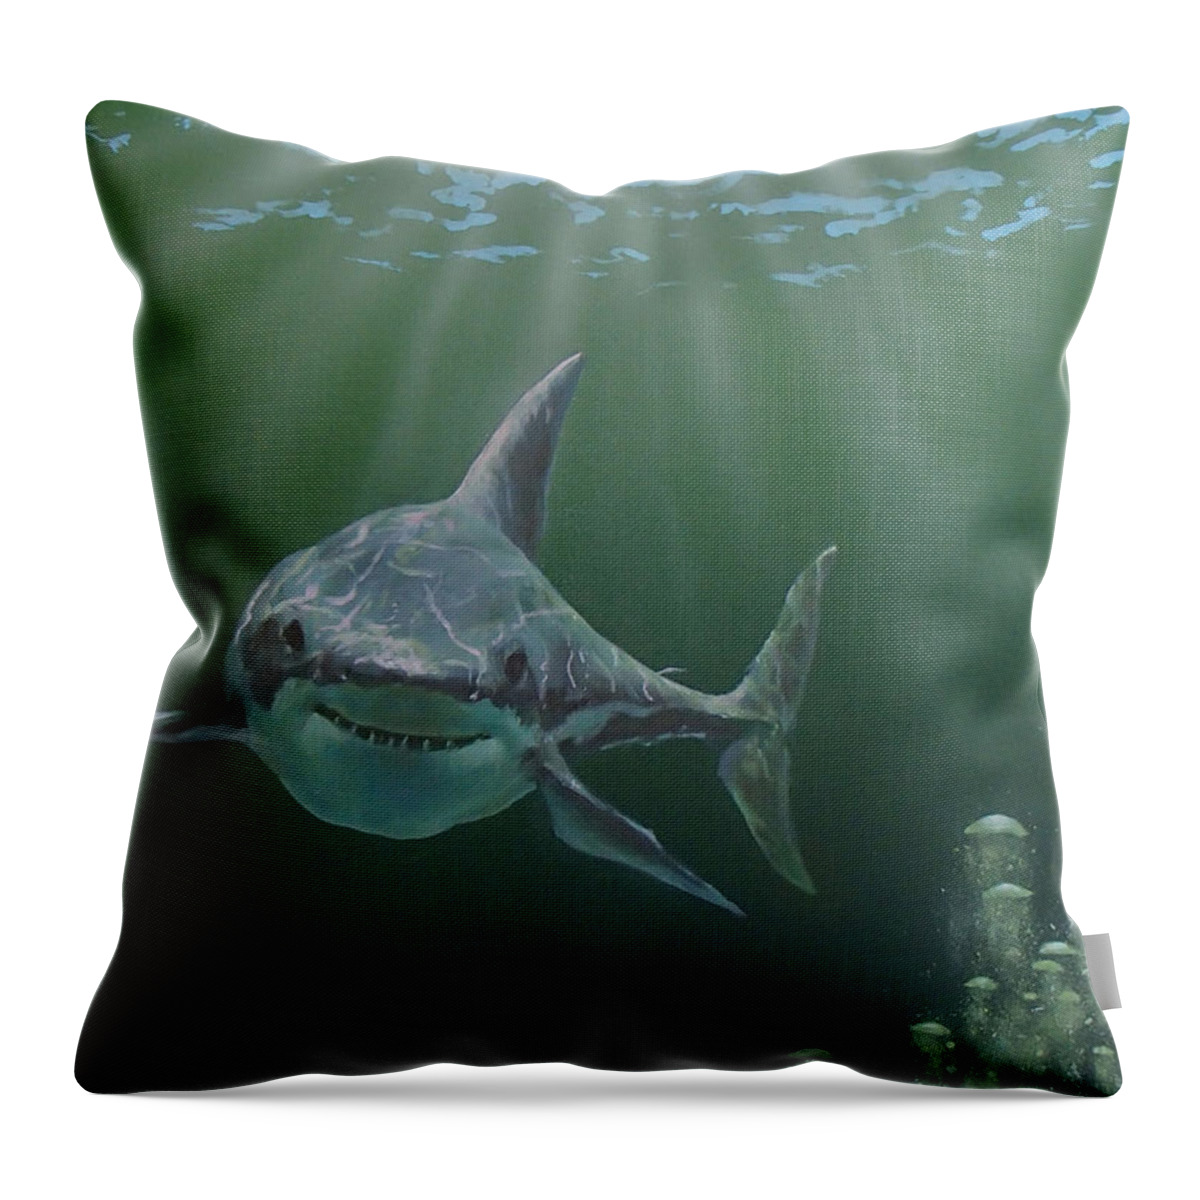 Shark Throw Pillow featuring the painting Untitled #3 by Philip Fleischer